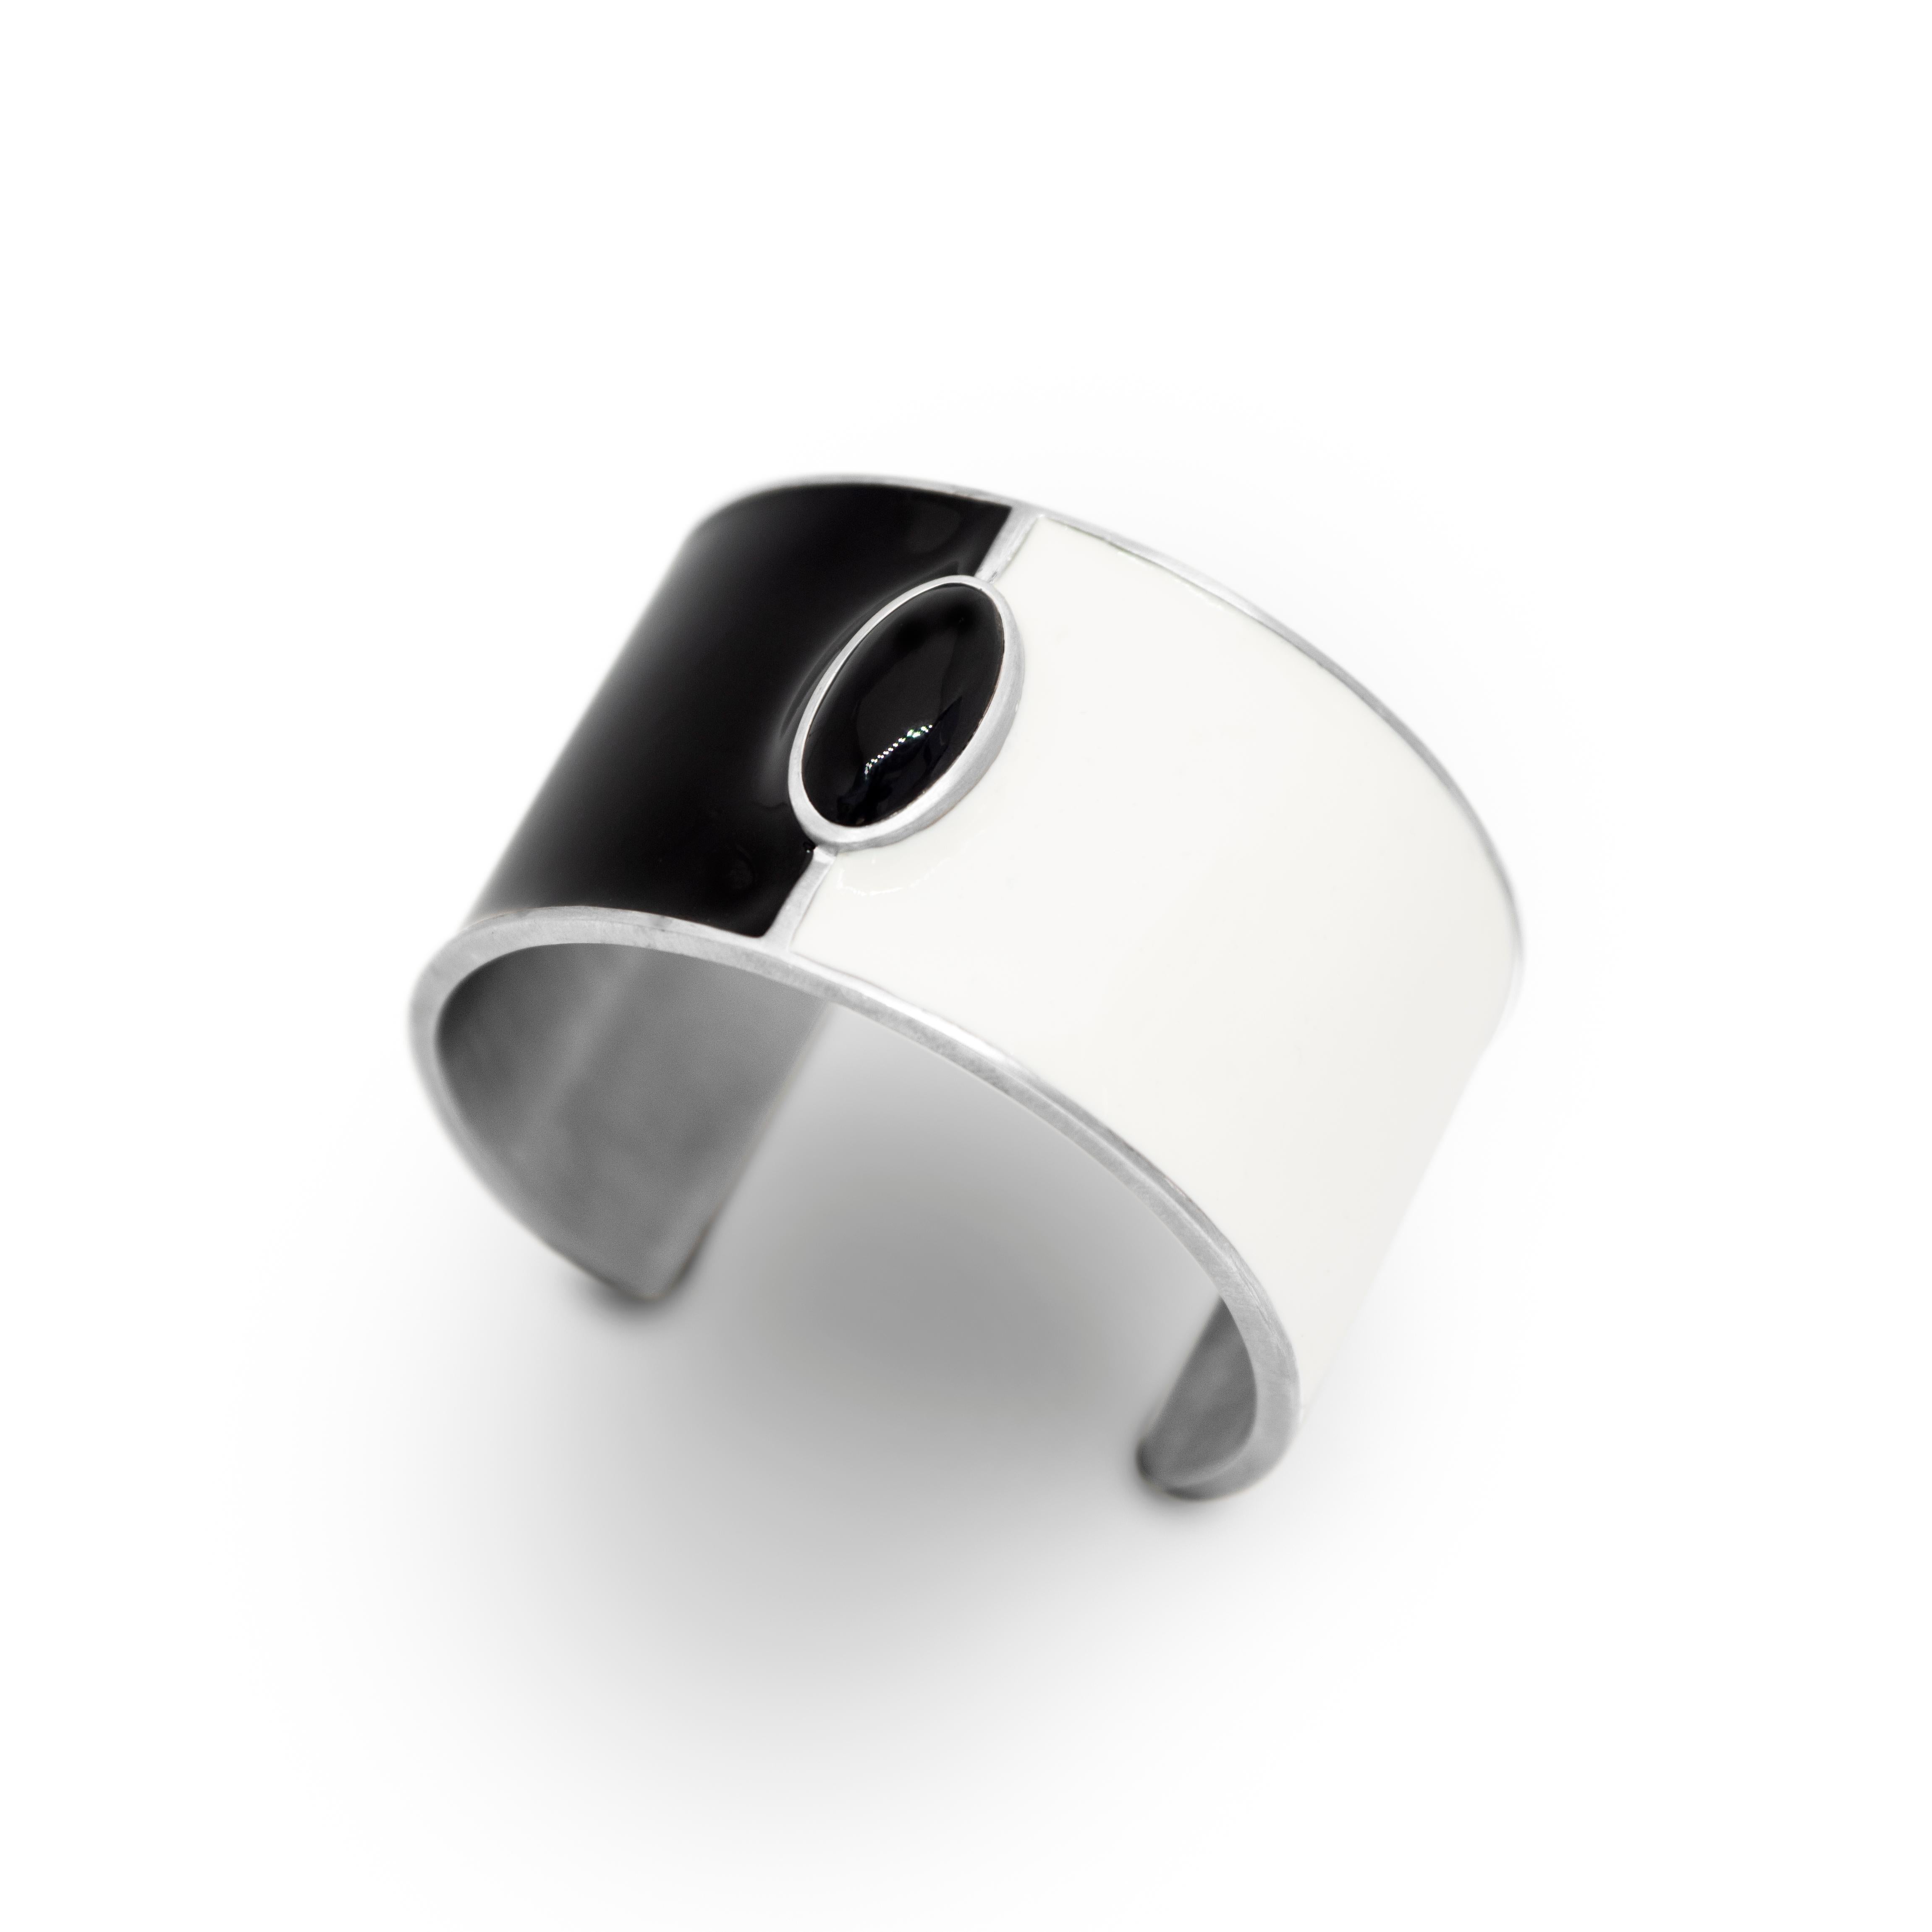 Genderless cuff bracelet in satin sterling silver, black and white enamel, set with black onyx cabochon. A geometric, minimalistic, androgynous, piece with healing properties. The black onyx is a powerful stone that releases negativity from a